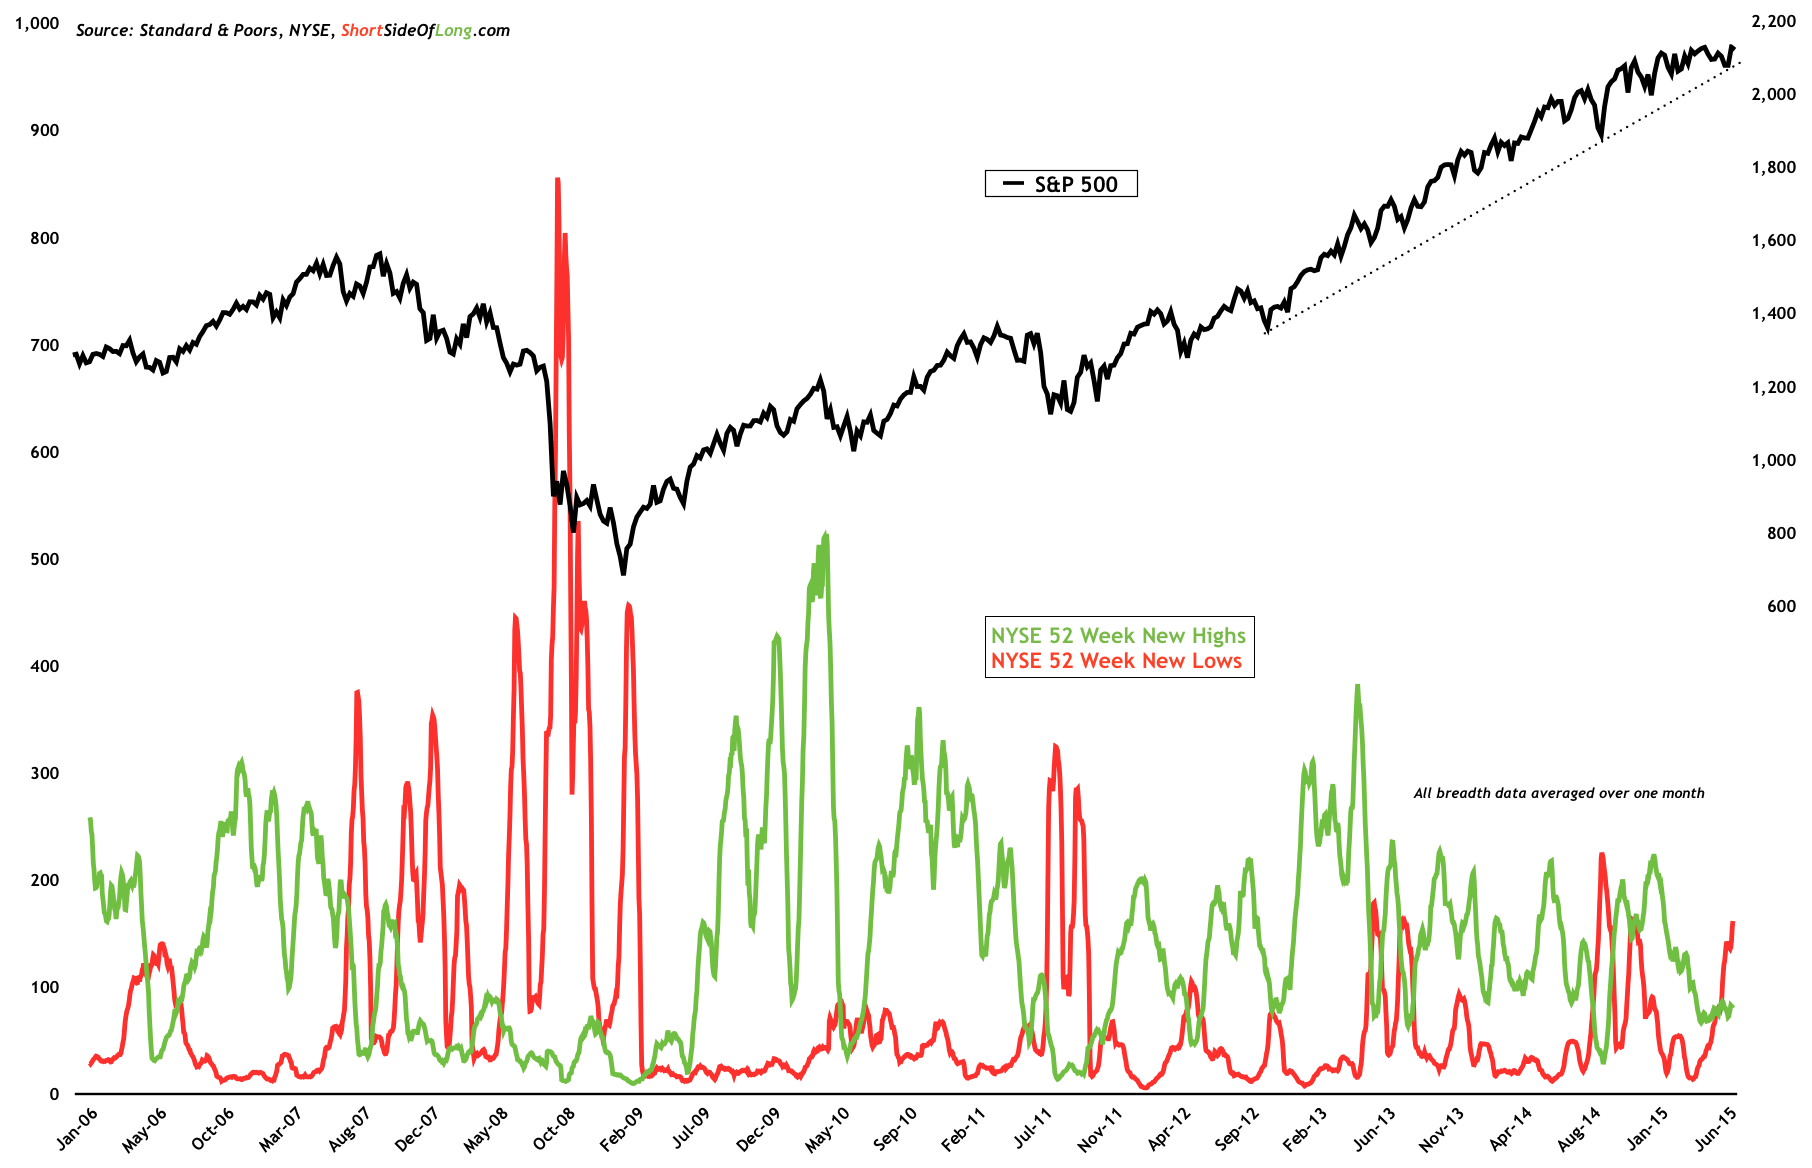 S&P 500 vs NYSE 52-W Highs/Lows 2005-2015 